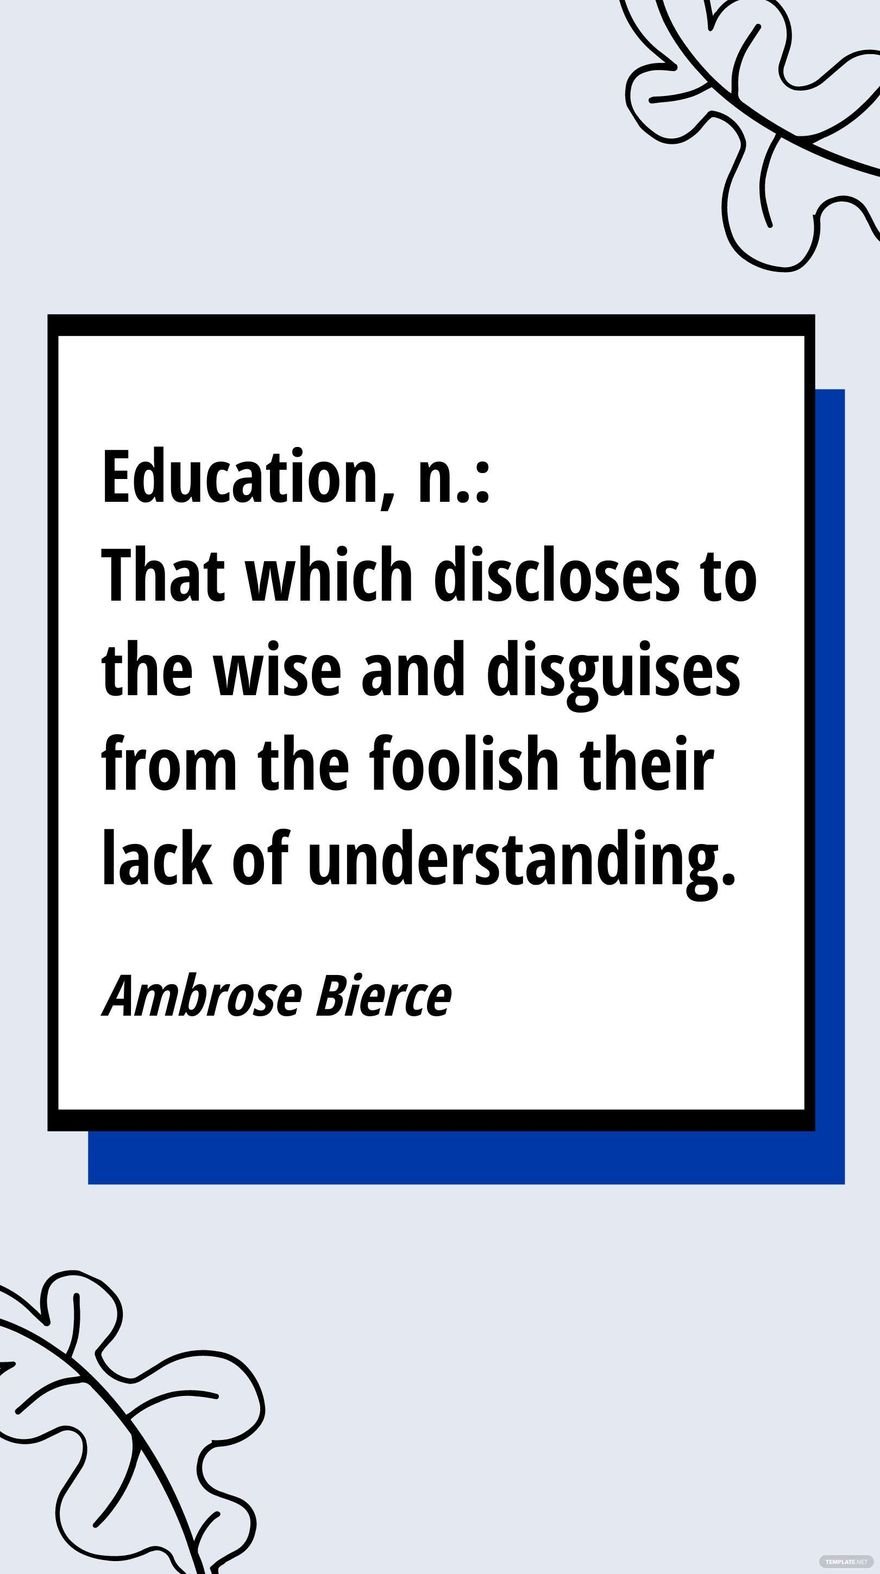 Ambrose Bierce - Education, n.: That which discloses to the wise and disguises from the foolish their lack of understanding.